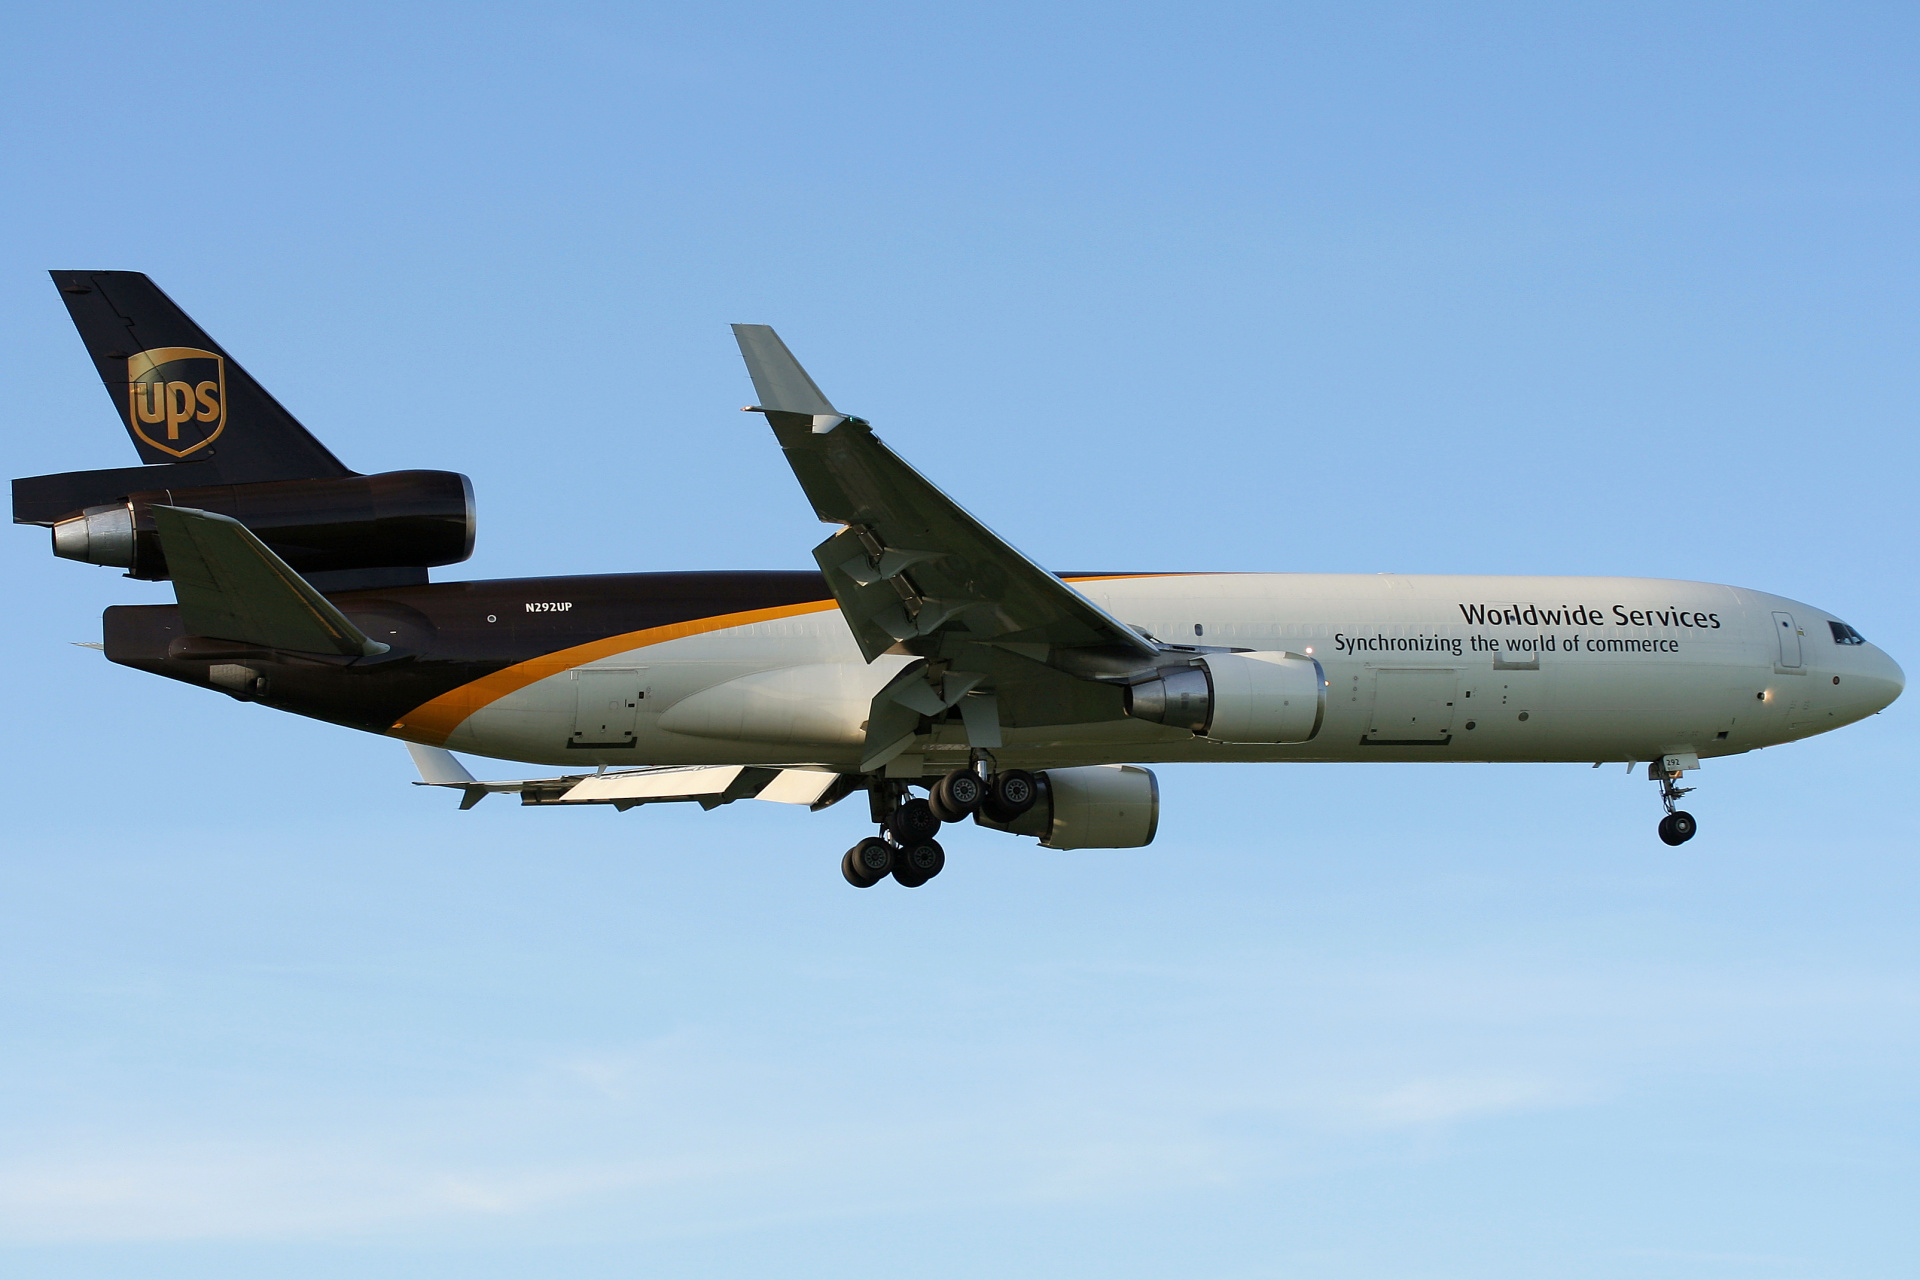 N292UP, United Parcel Service (UPS) Airlines (Aircraft » EPWA Spotting » McDonnell Douglas MD-11F)